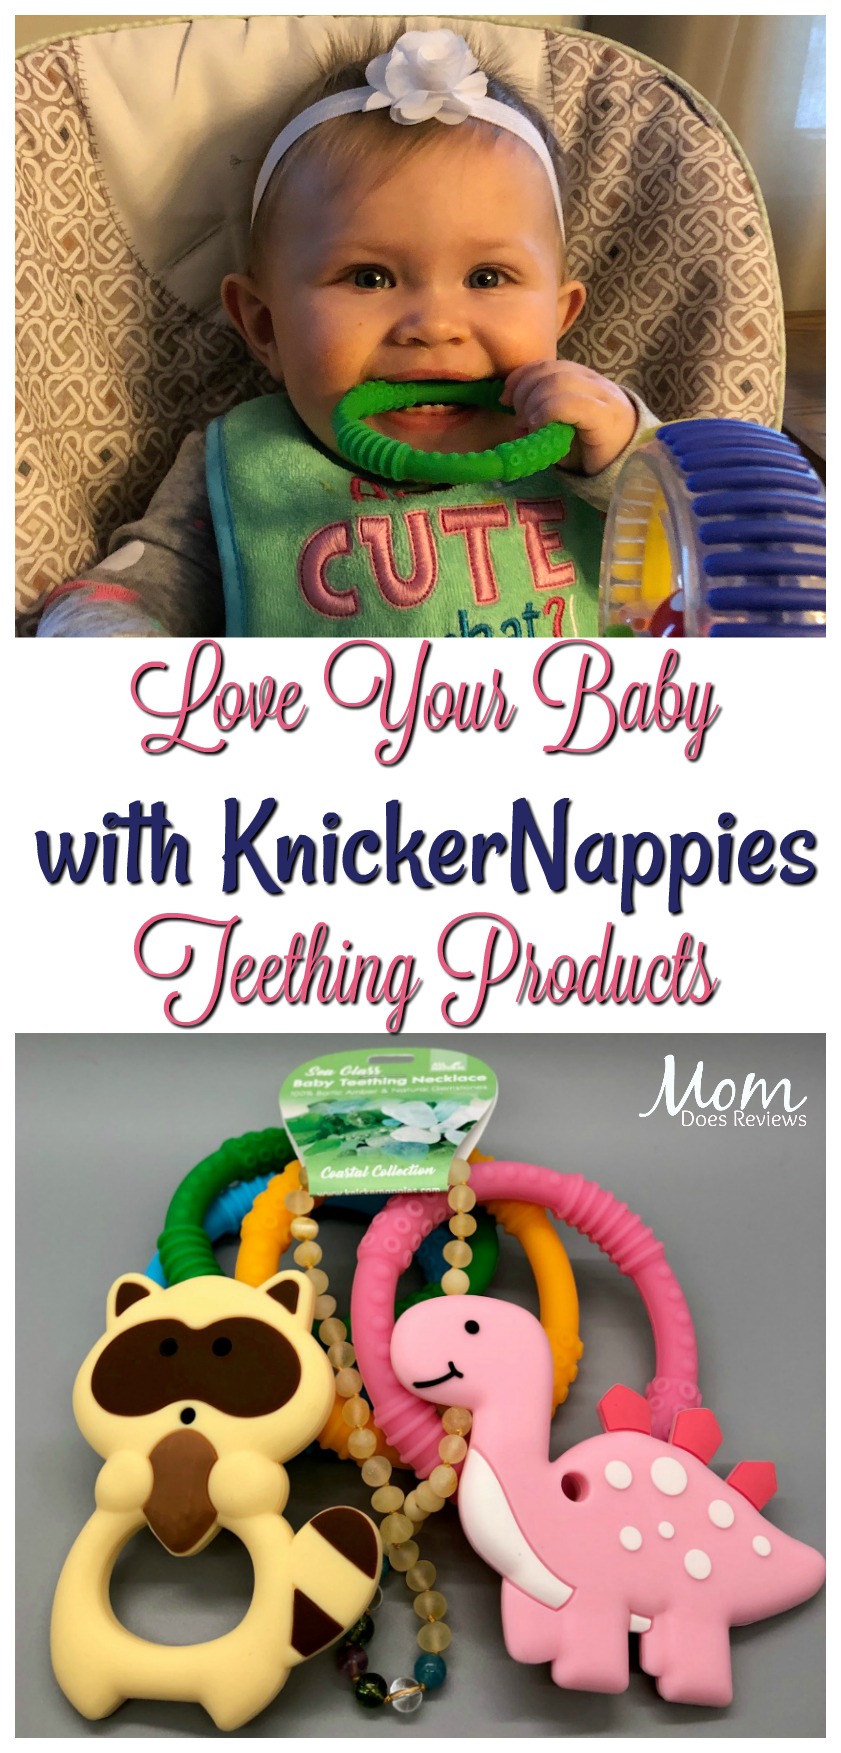 Love Your Baby with KnickerNappies Teething Products #sweet2019 #babies #teething #siliconeteethers